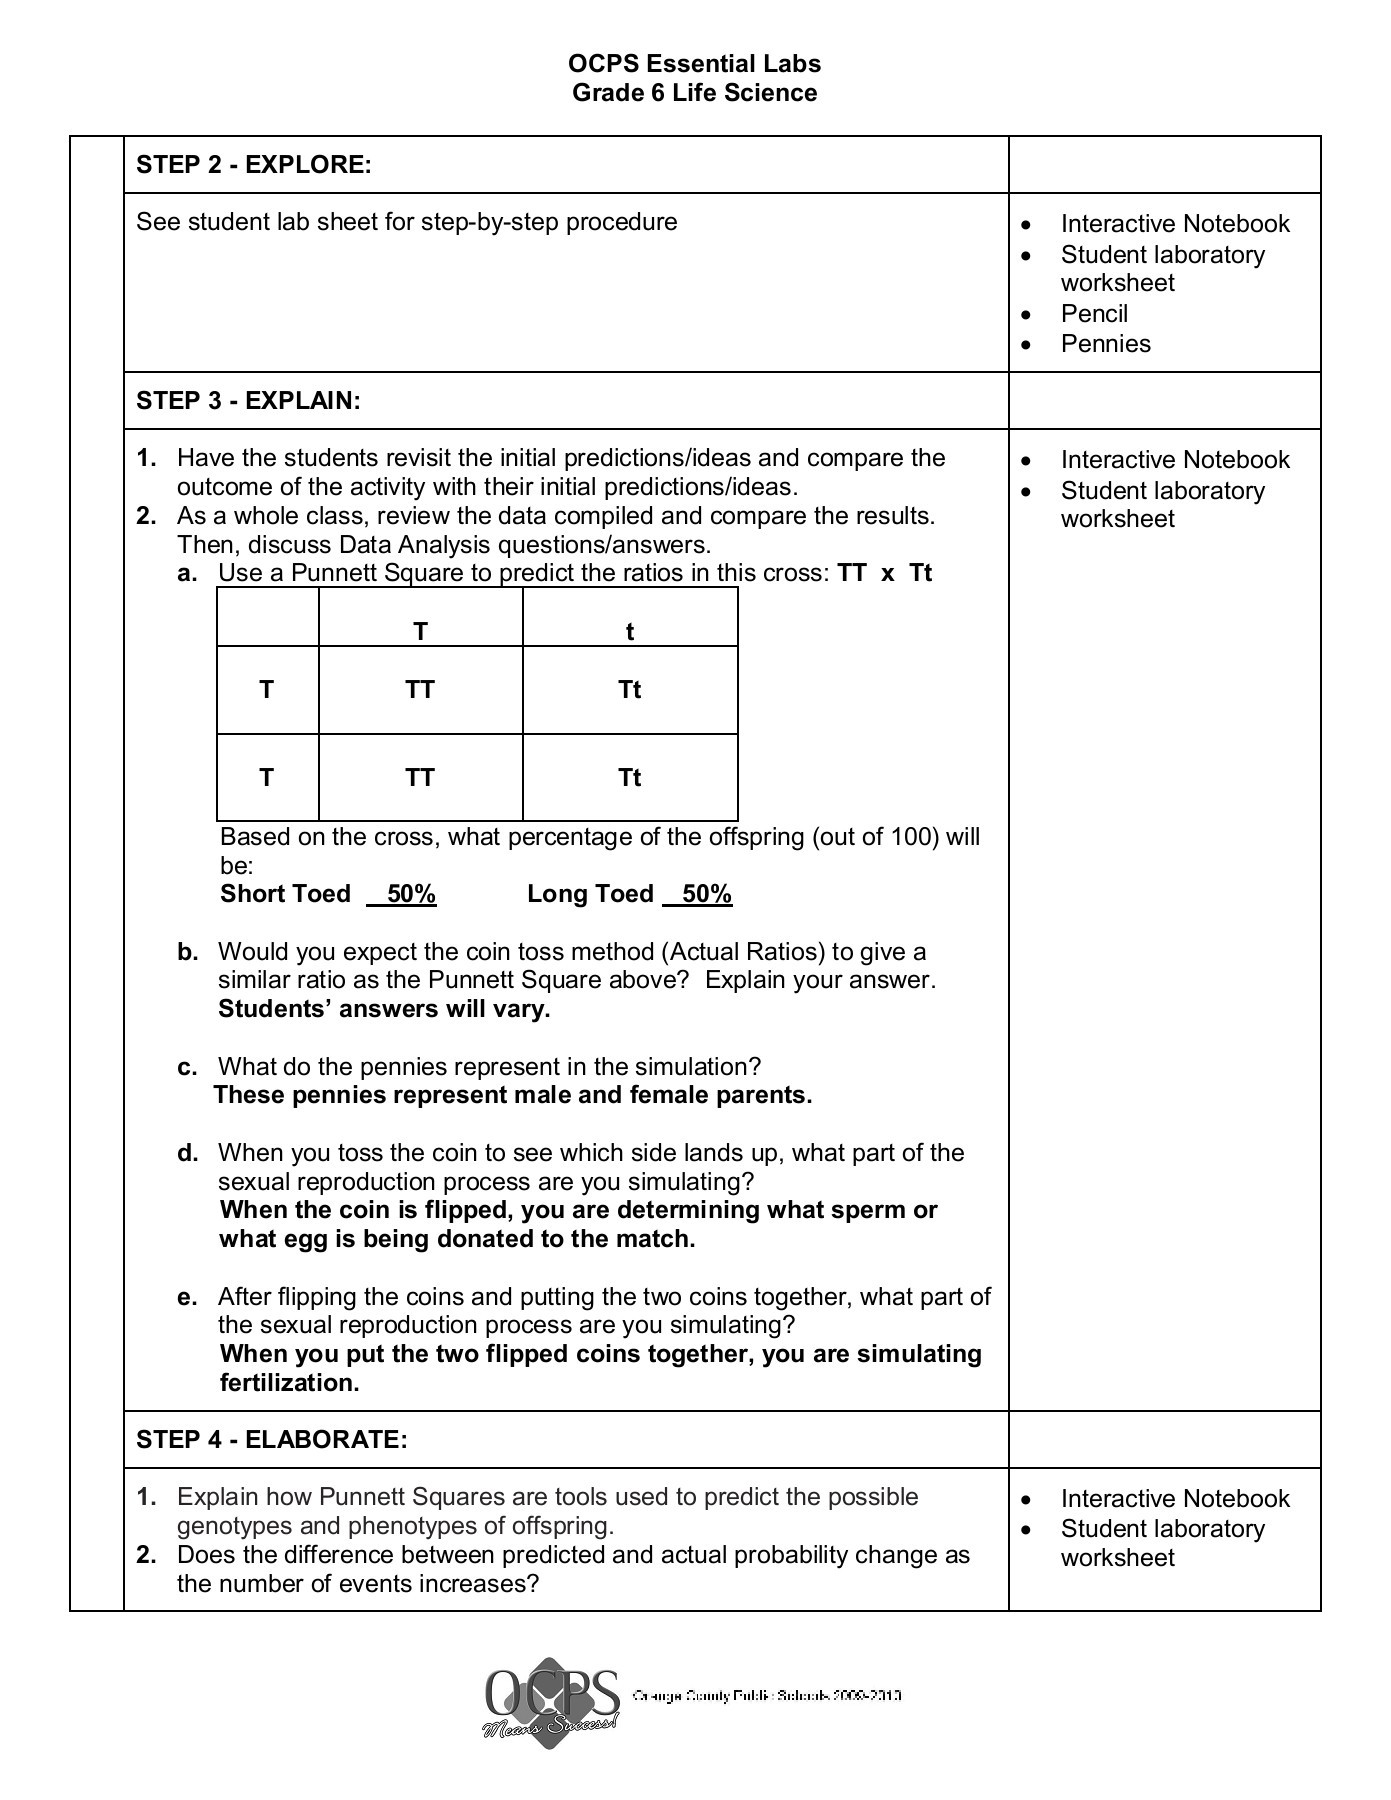 Genotypes and Phenotypes Worksheet Grade 6 Life Science Penny Genetics What are the Chances